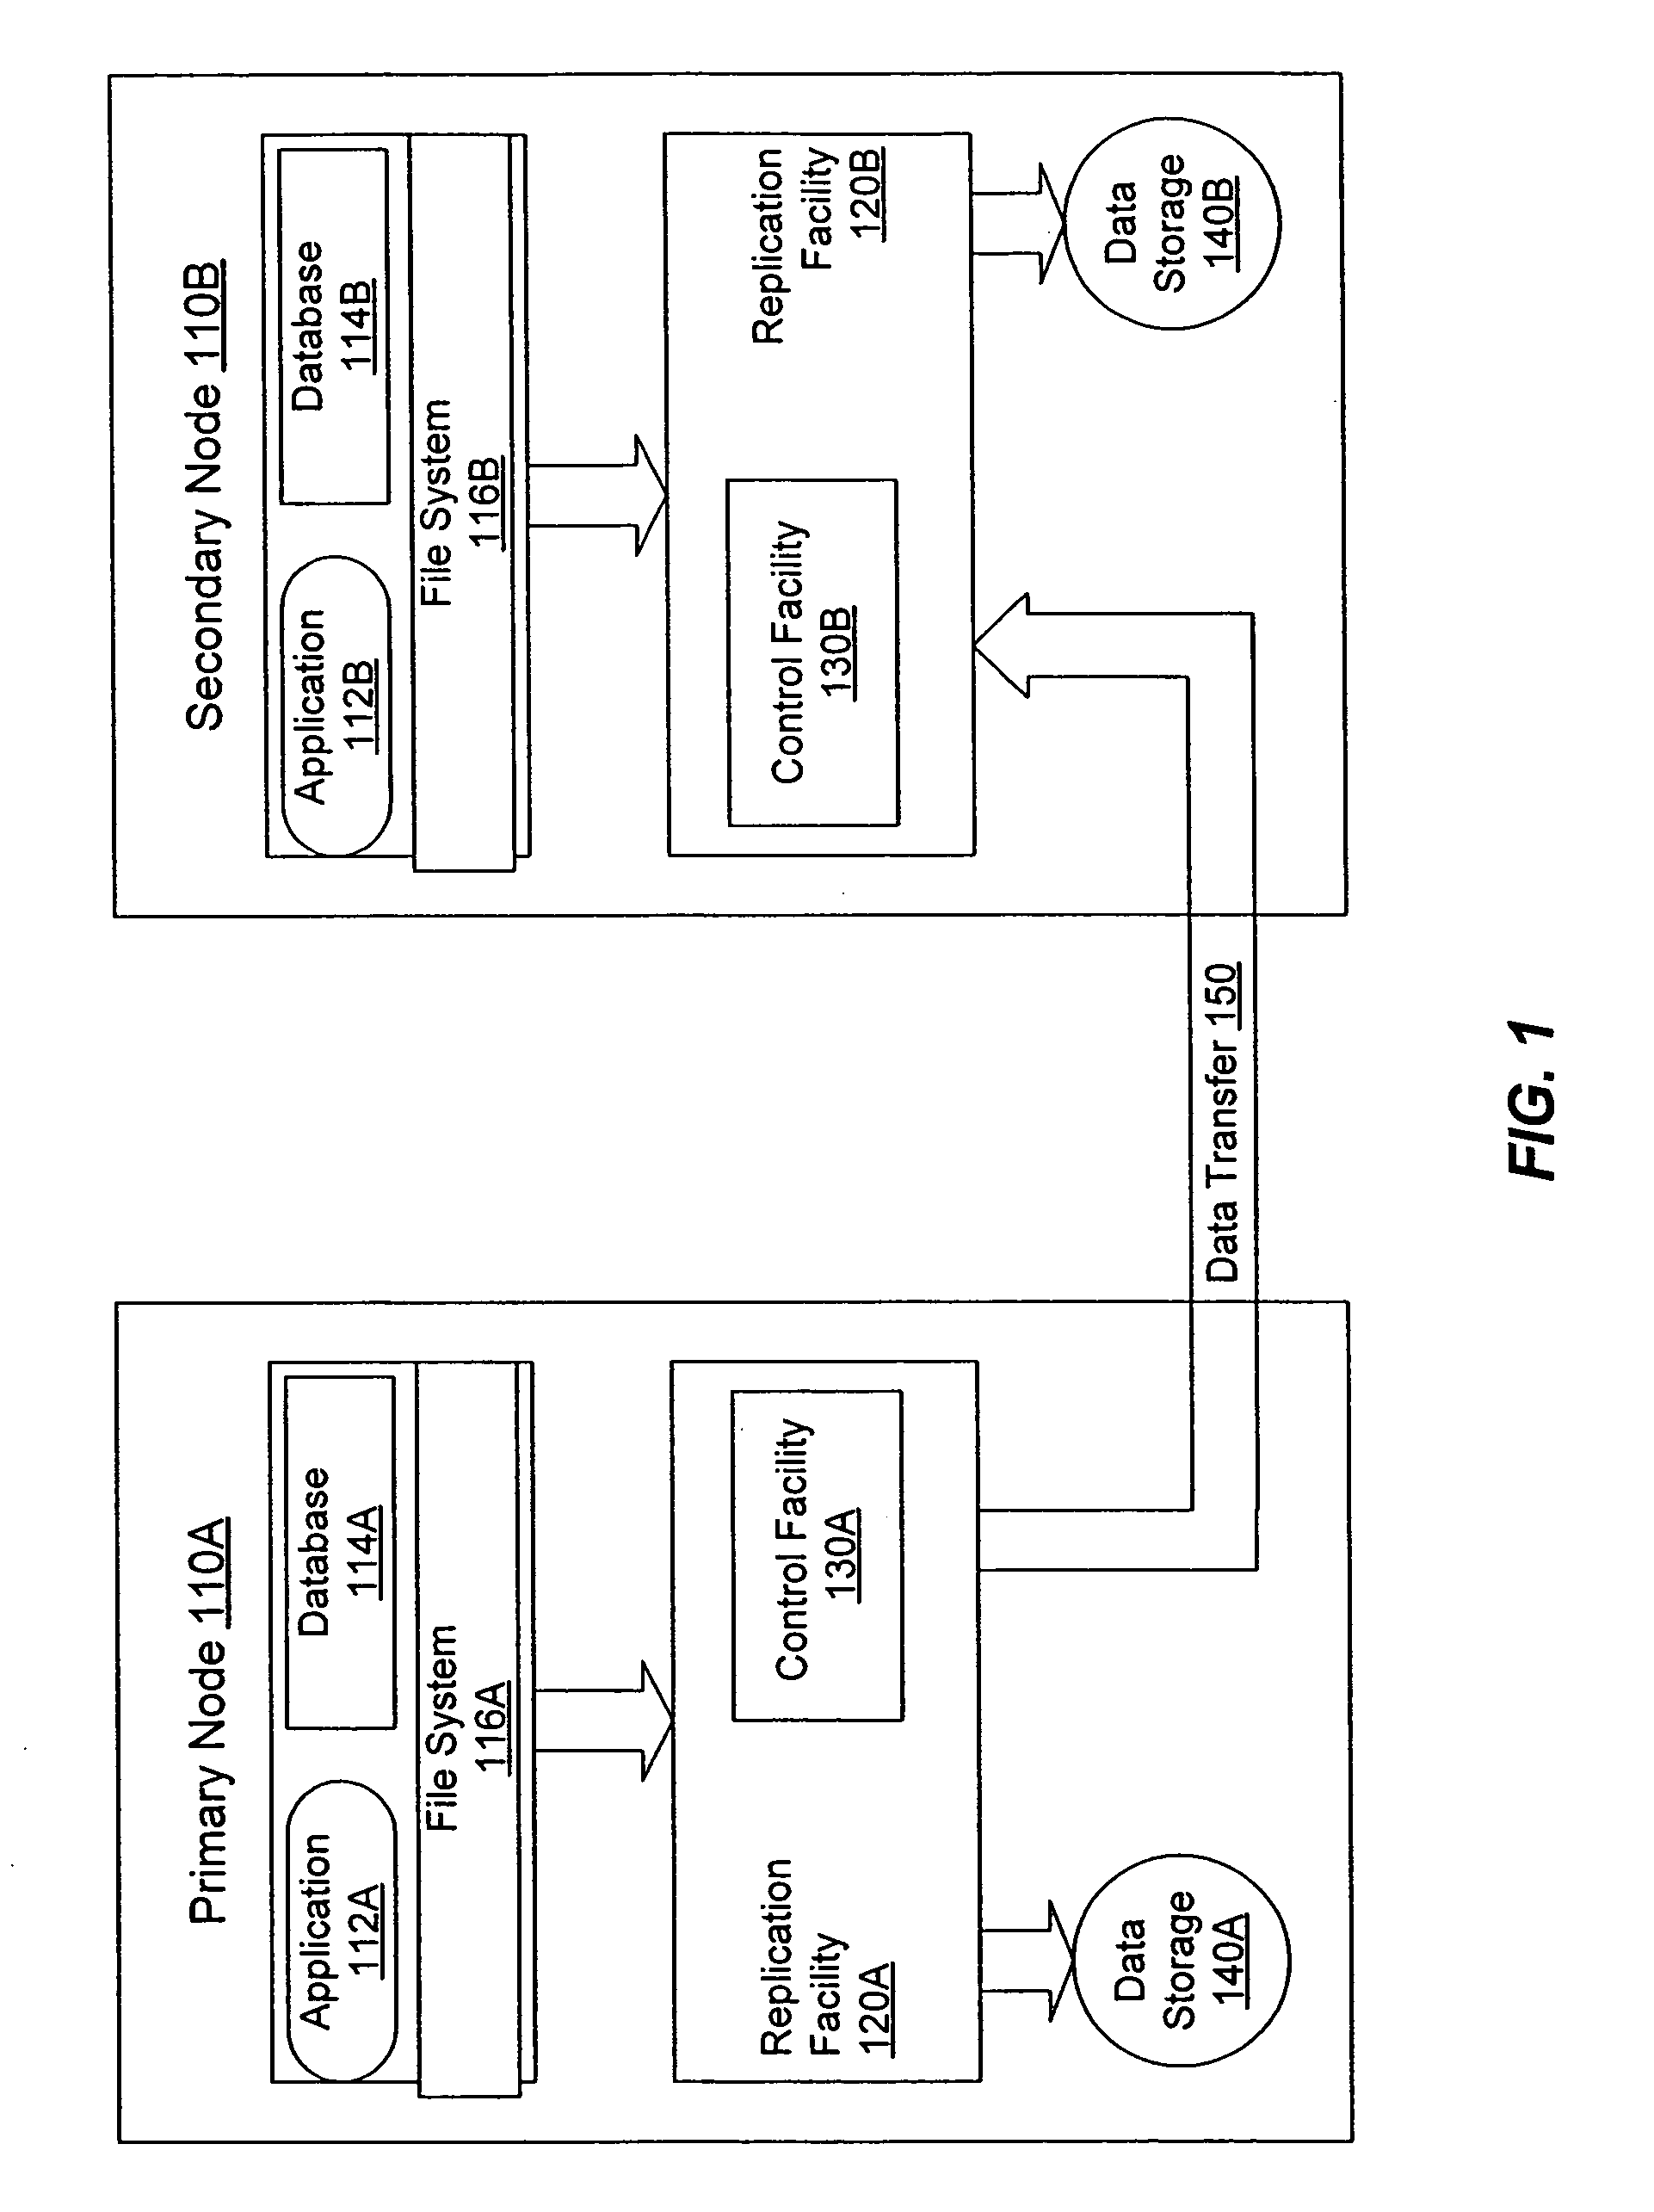 Control facility for processing in-band control messages during data replication